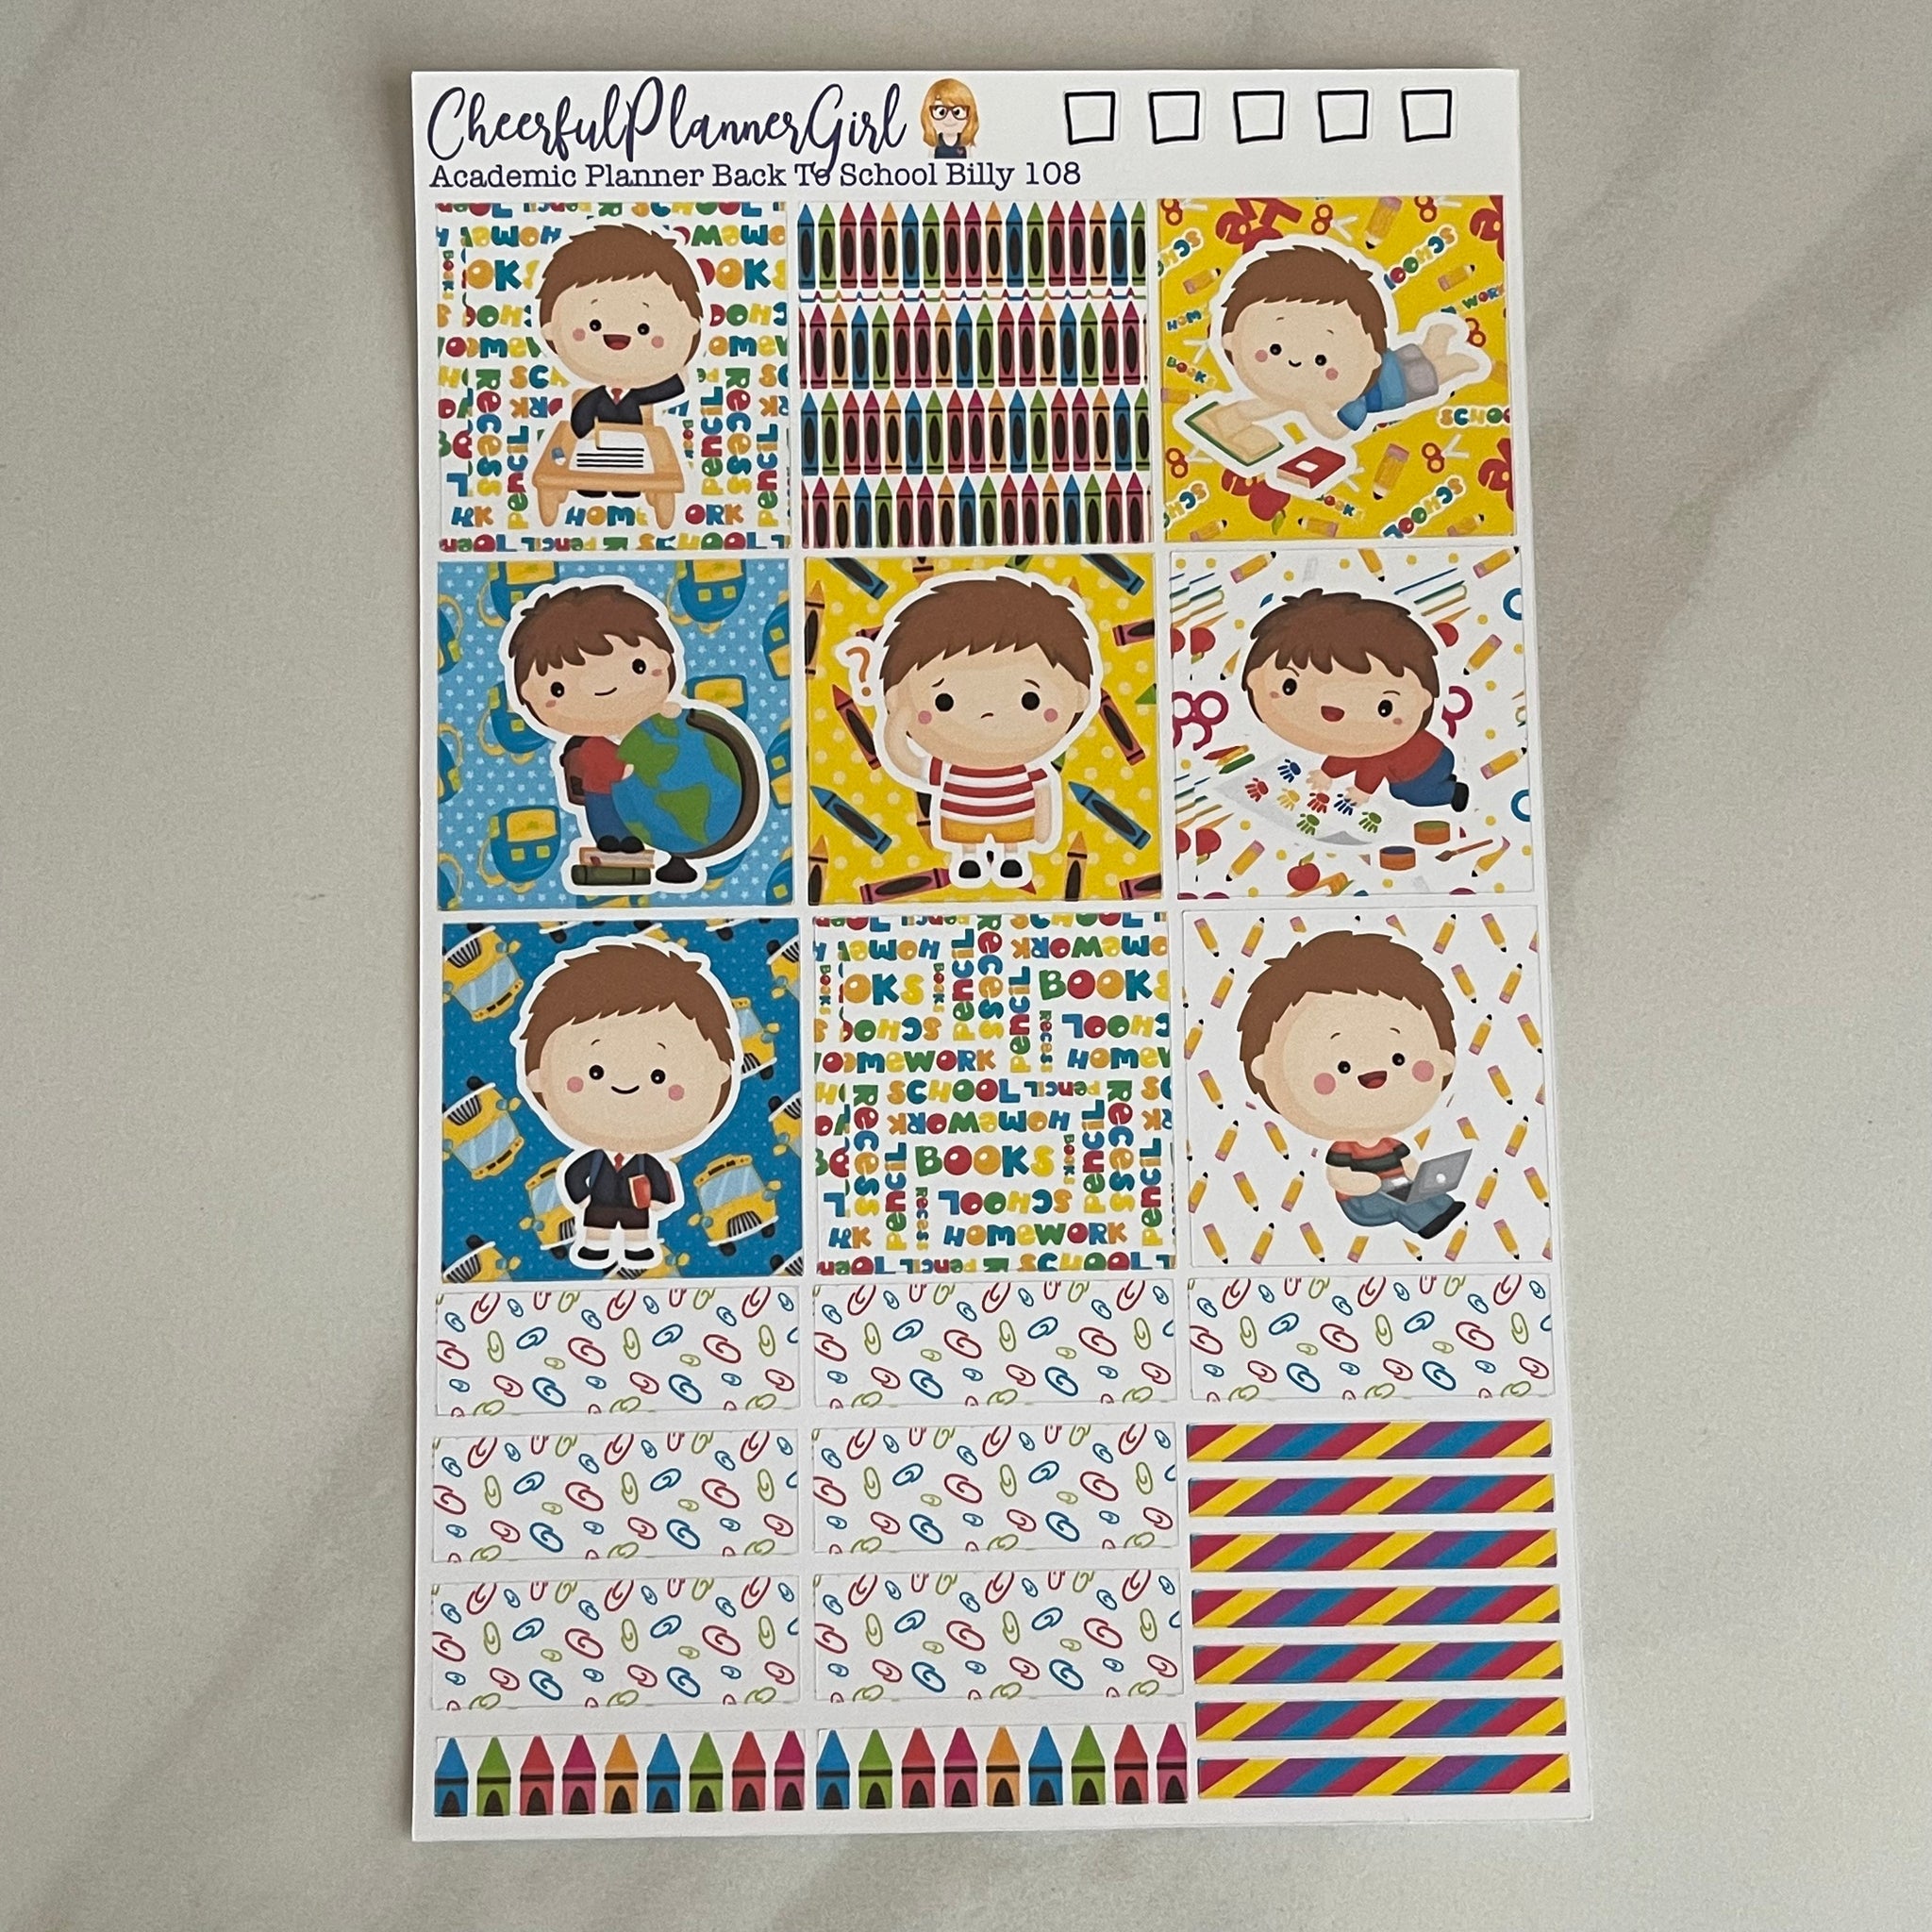 Back to School with Billy for Academic Planner Weekly Layout